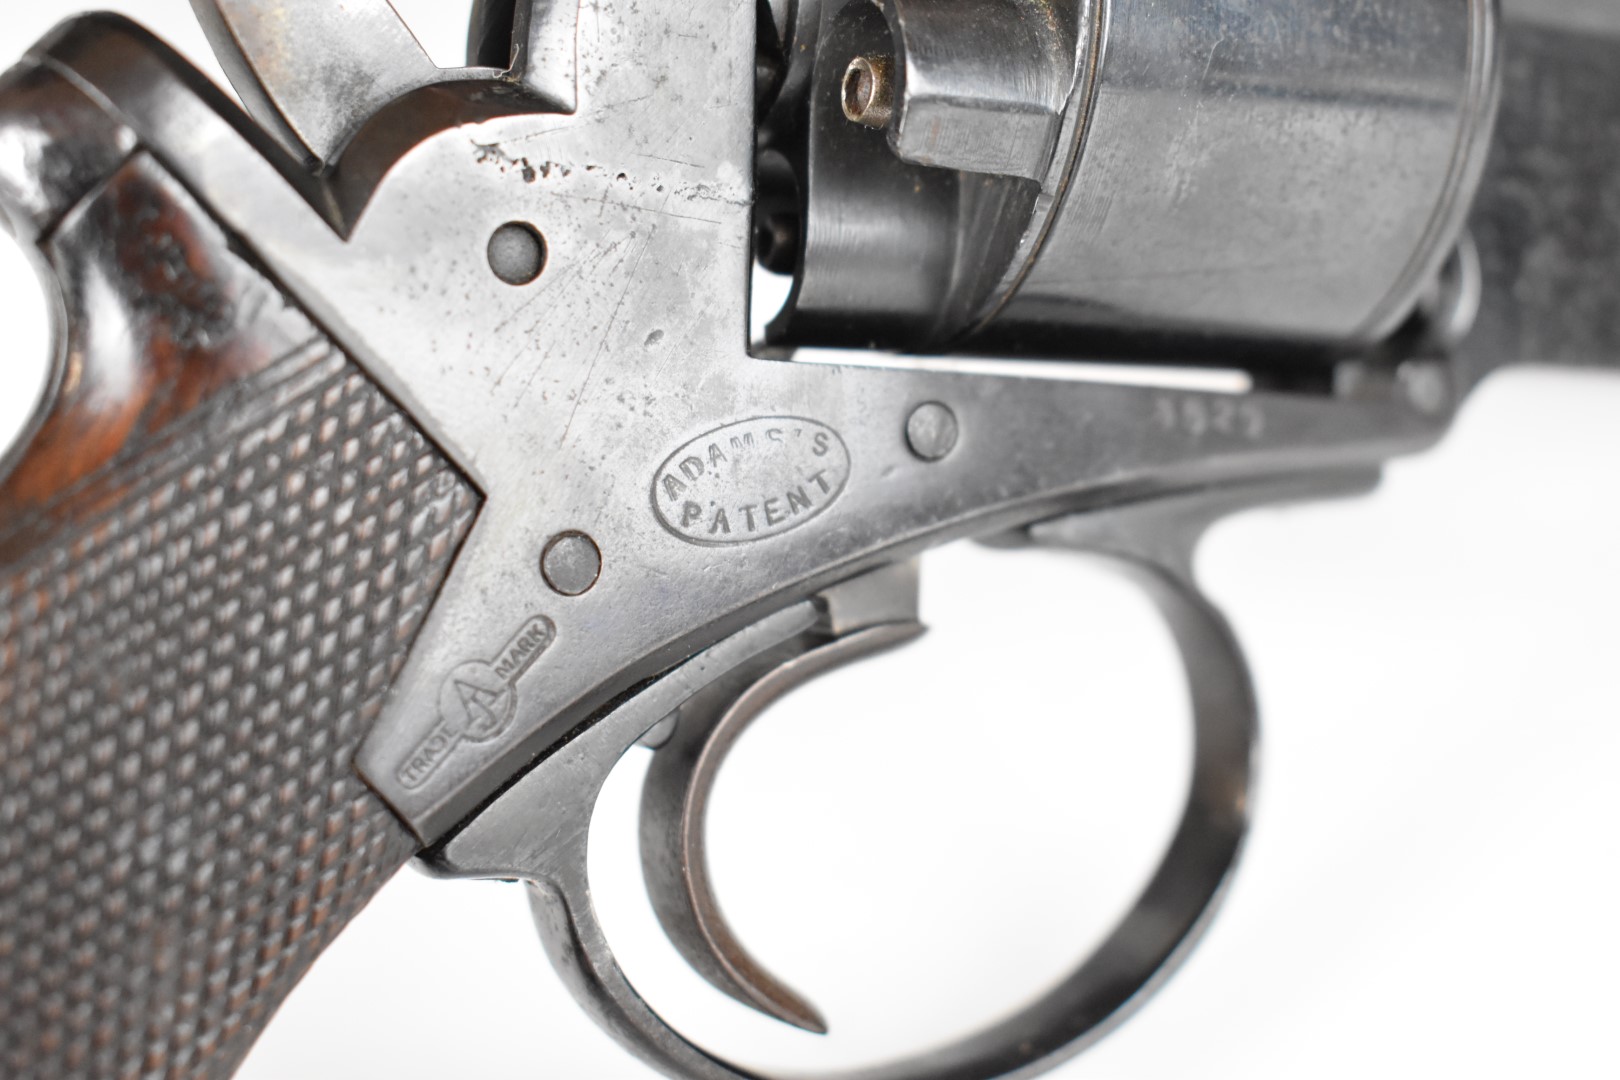 Adam's Patent 50 bore six-shot double-action revolver with chequered grip, line engraved cylinder, - Image 9 of 30